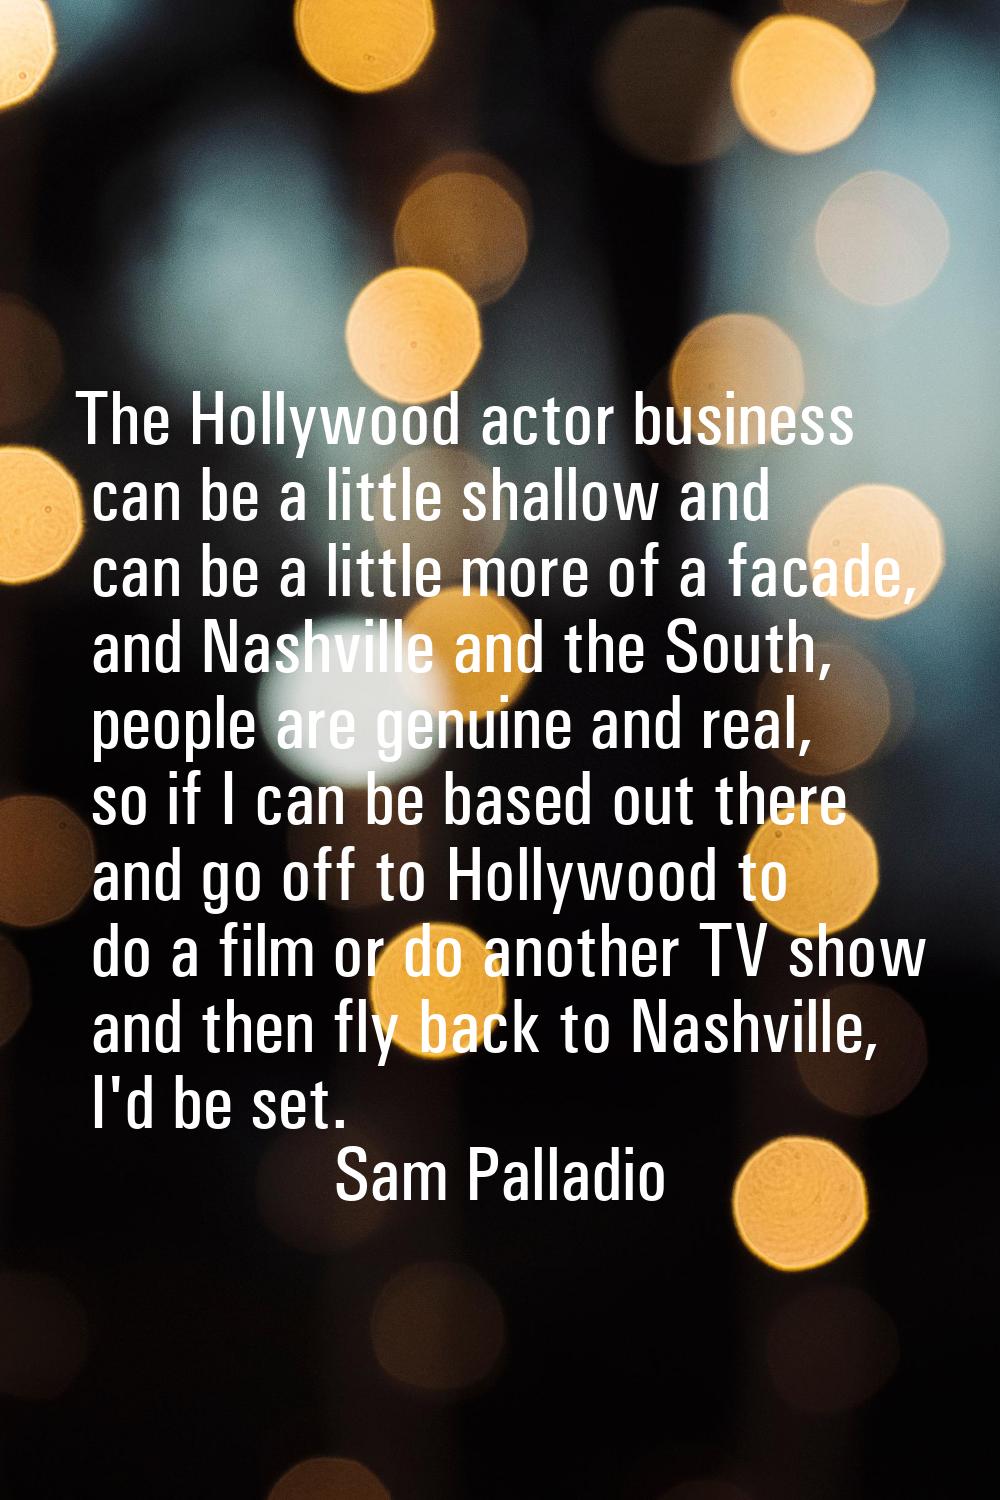 The Hollywood actor business can be a little shallow and can be a little more of a facade, and Nash